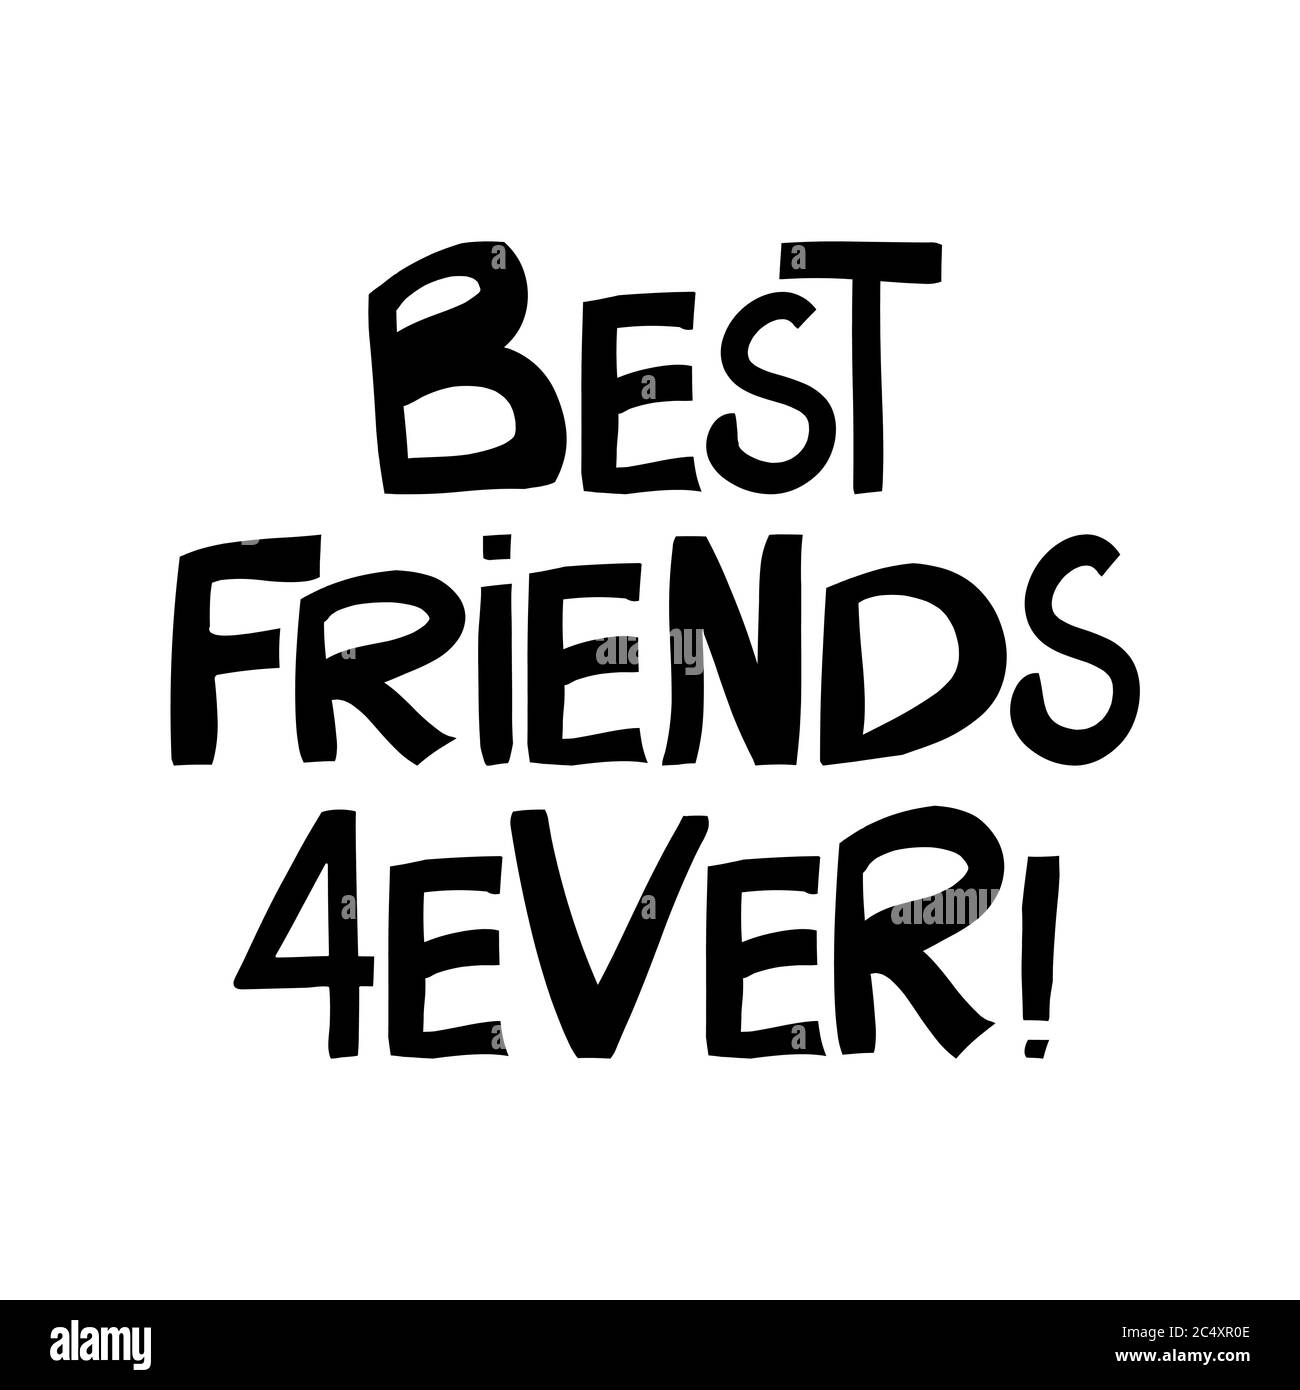 17,312 Best Friends Forever Royalty-Free Images, Stock Photos